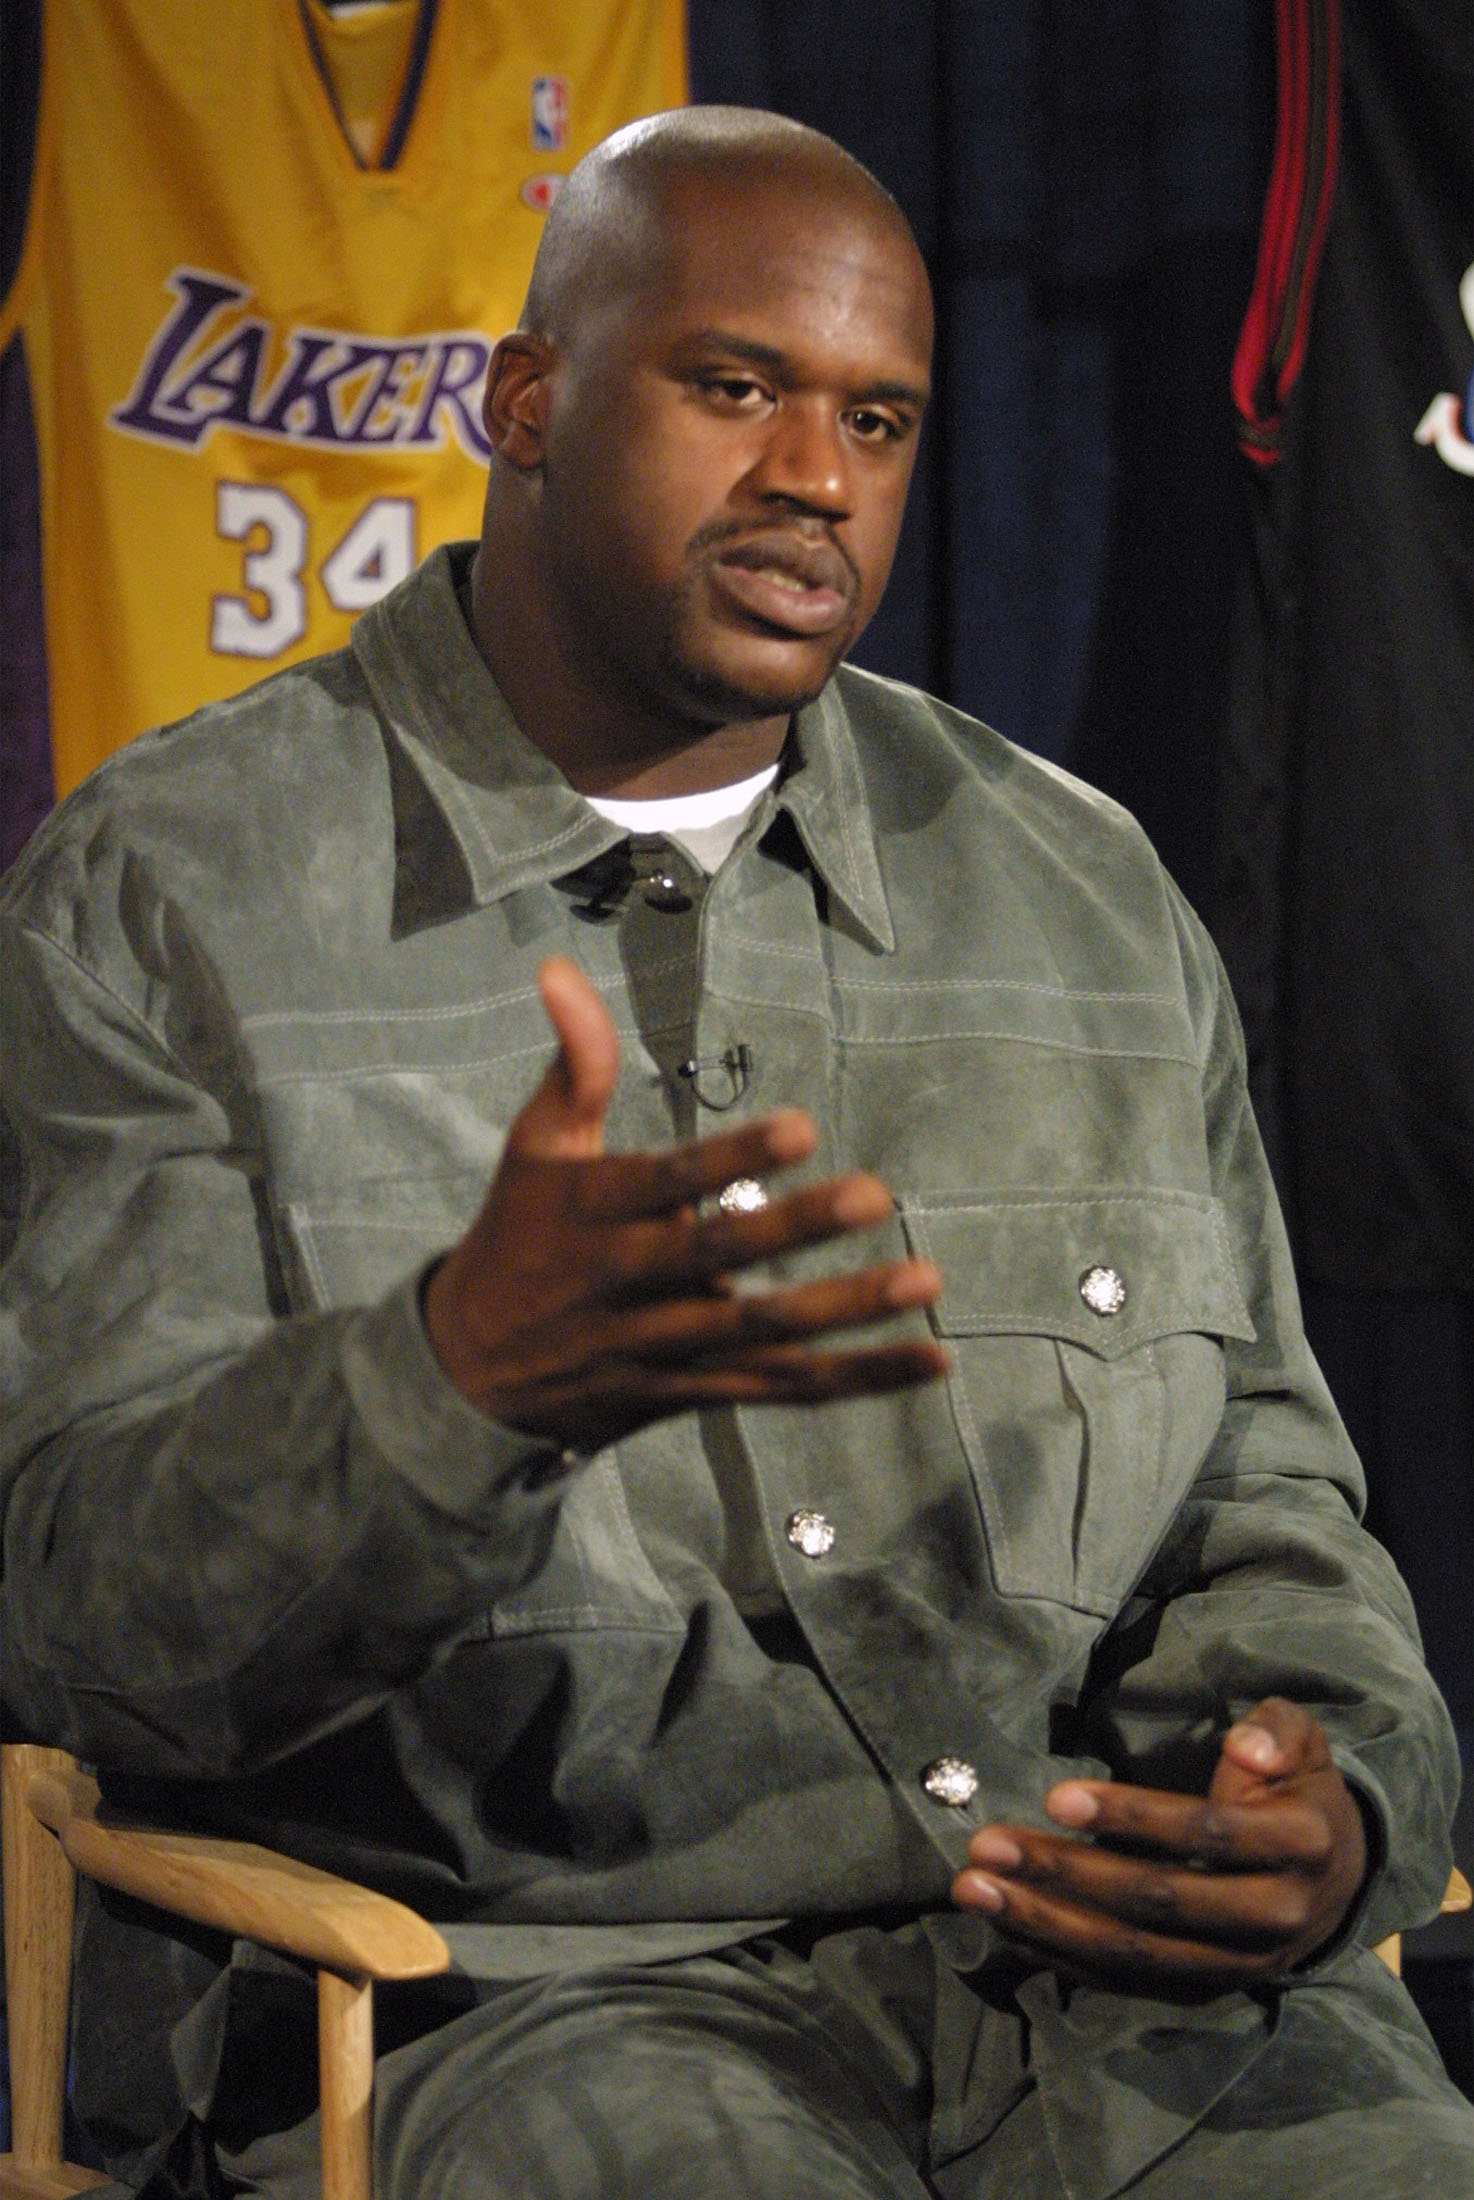 385420 04: Los Angeles Lakers center Shaquille O''Neal speaks on NBC's 'Meet the Press' February 11, 2001 in Washington, D. C. The topic was Professional Basketball: Sports and Society and Role Models. (Photo by Alex Wong/Newsmakers)